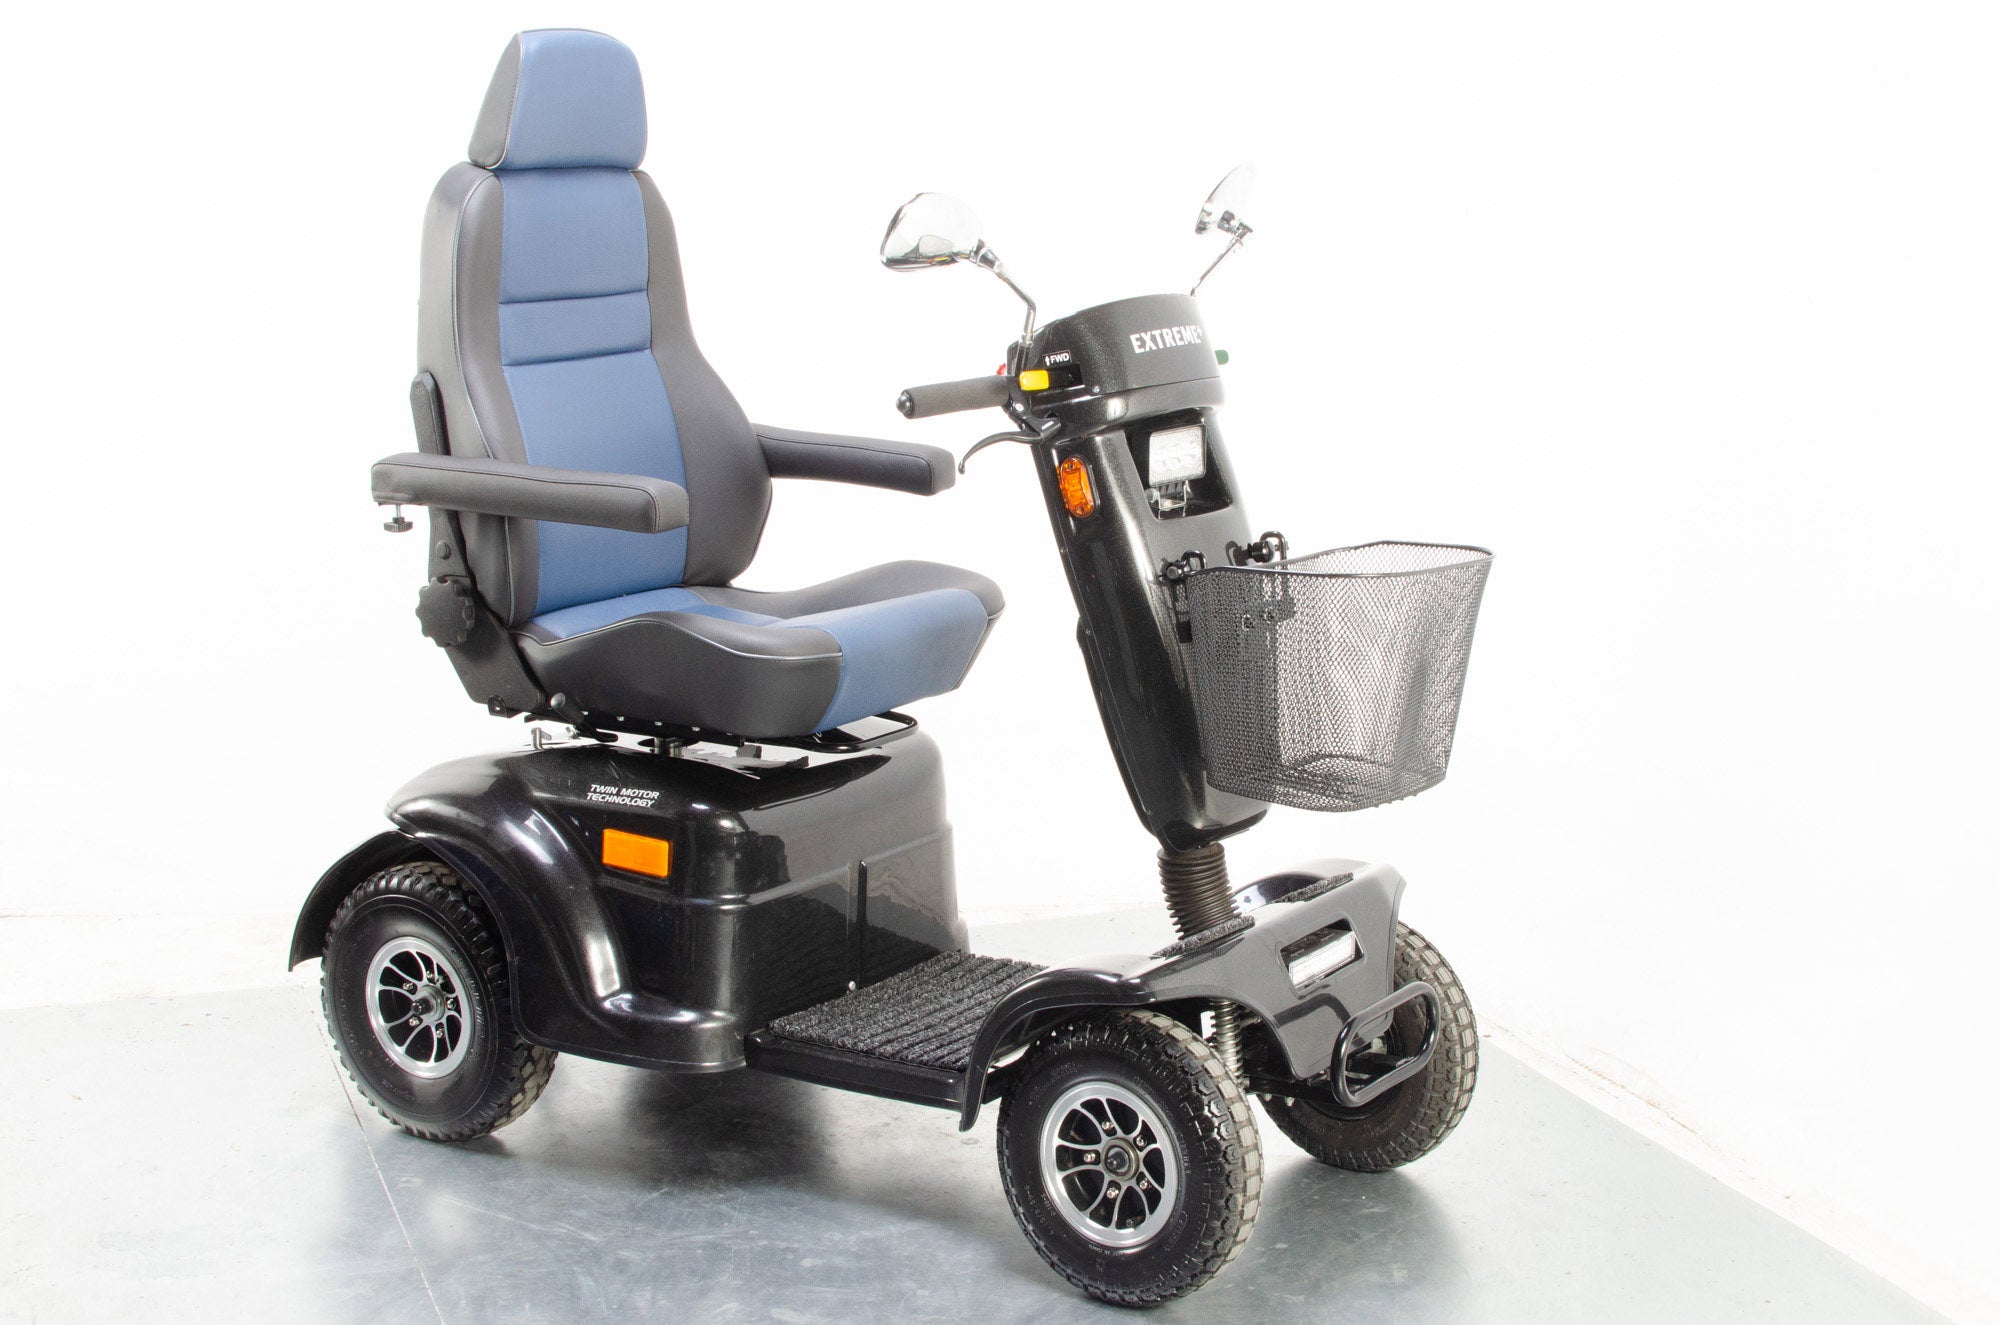 2019 Extreme + Dual motor Electric Mobility Scooter from Scooter Tech Large All Terrain Black